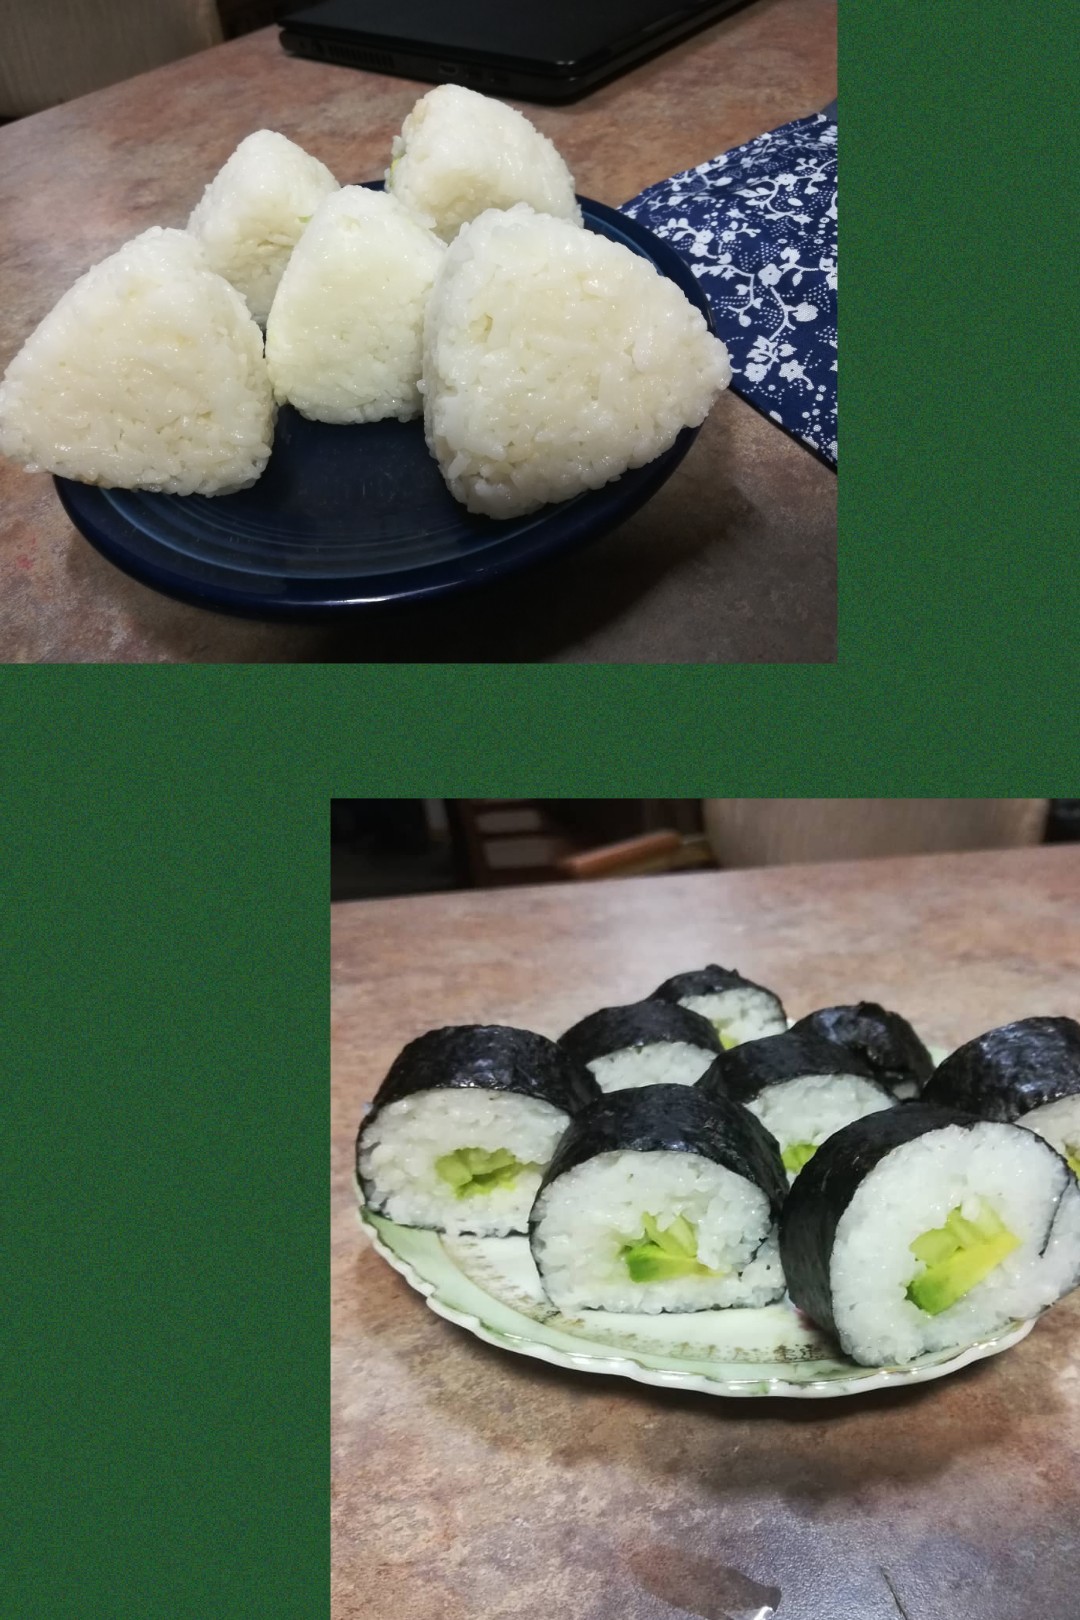 I made sushi and onigiri today! it's cucumber and avocado